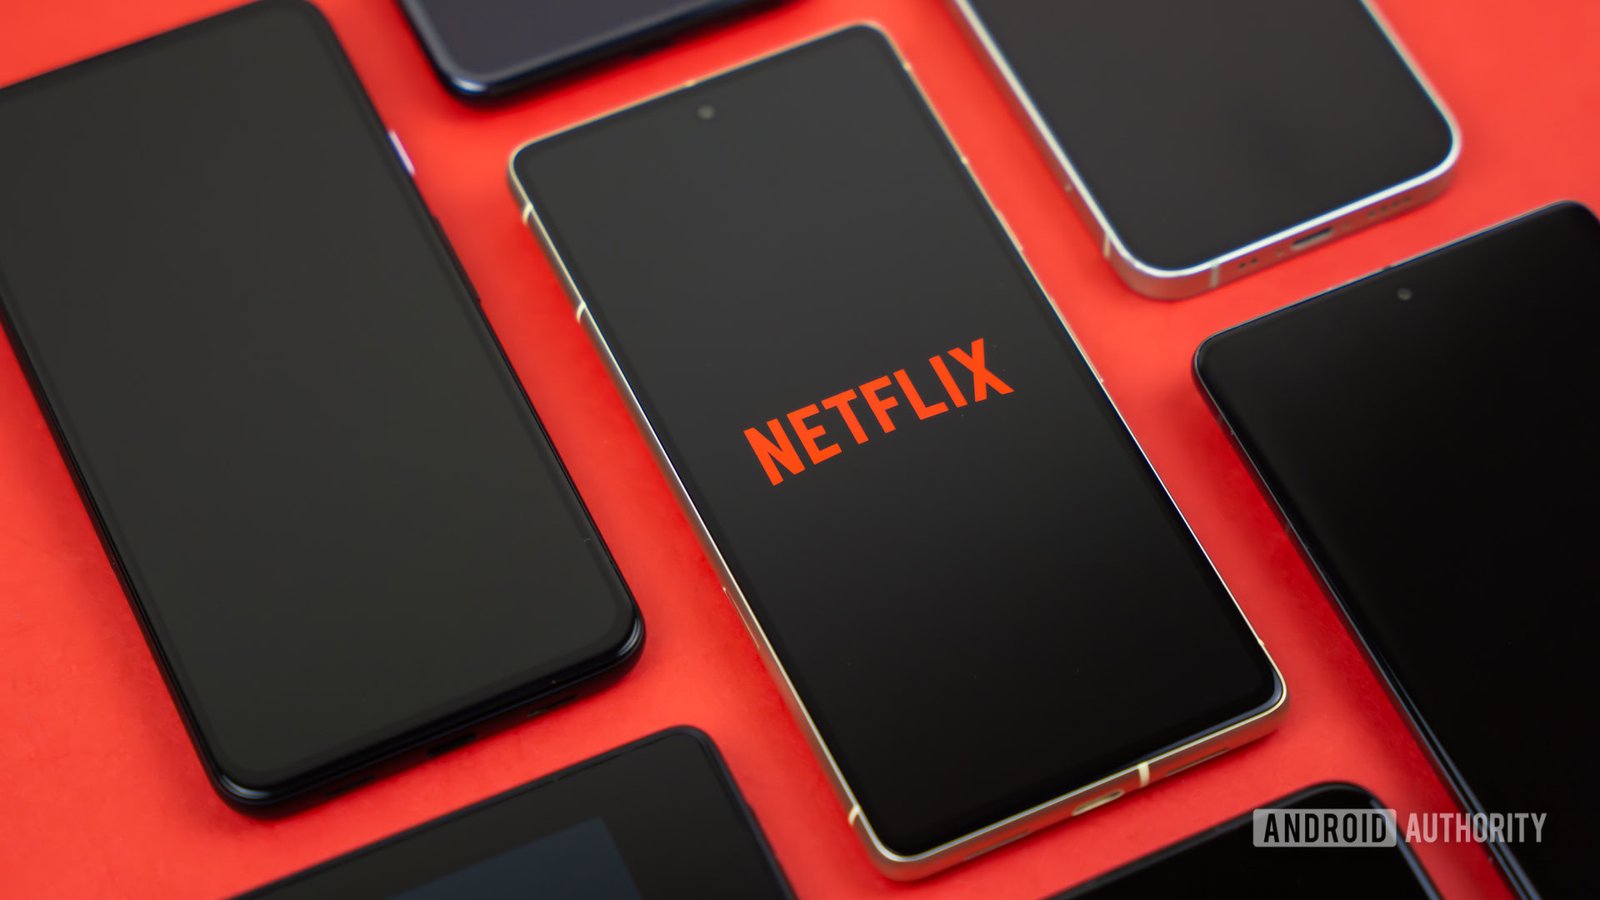 Netflix reportedly considering a free plan for select markets